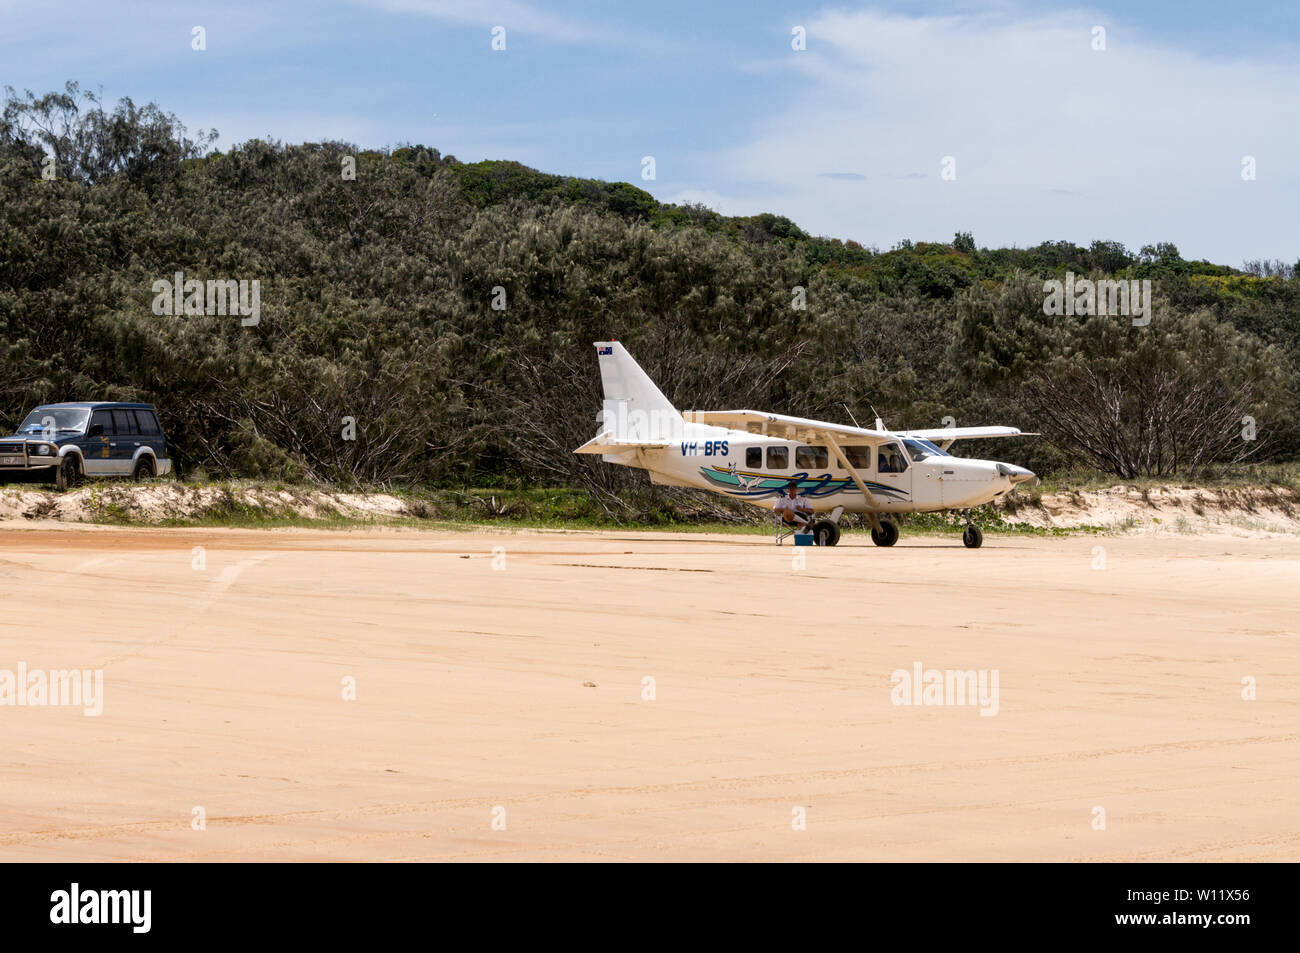 A pilot sitting under the wing of his small passenger carrying aircraft parked on the 75 mile beach on Fraser Island, Queensland, Australia.   The air Stock Photo